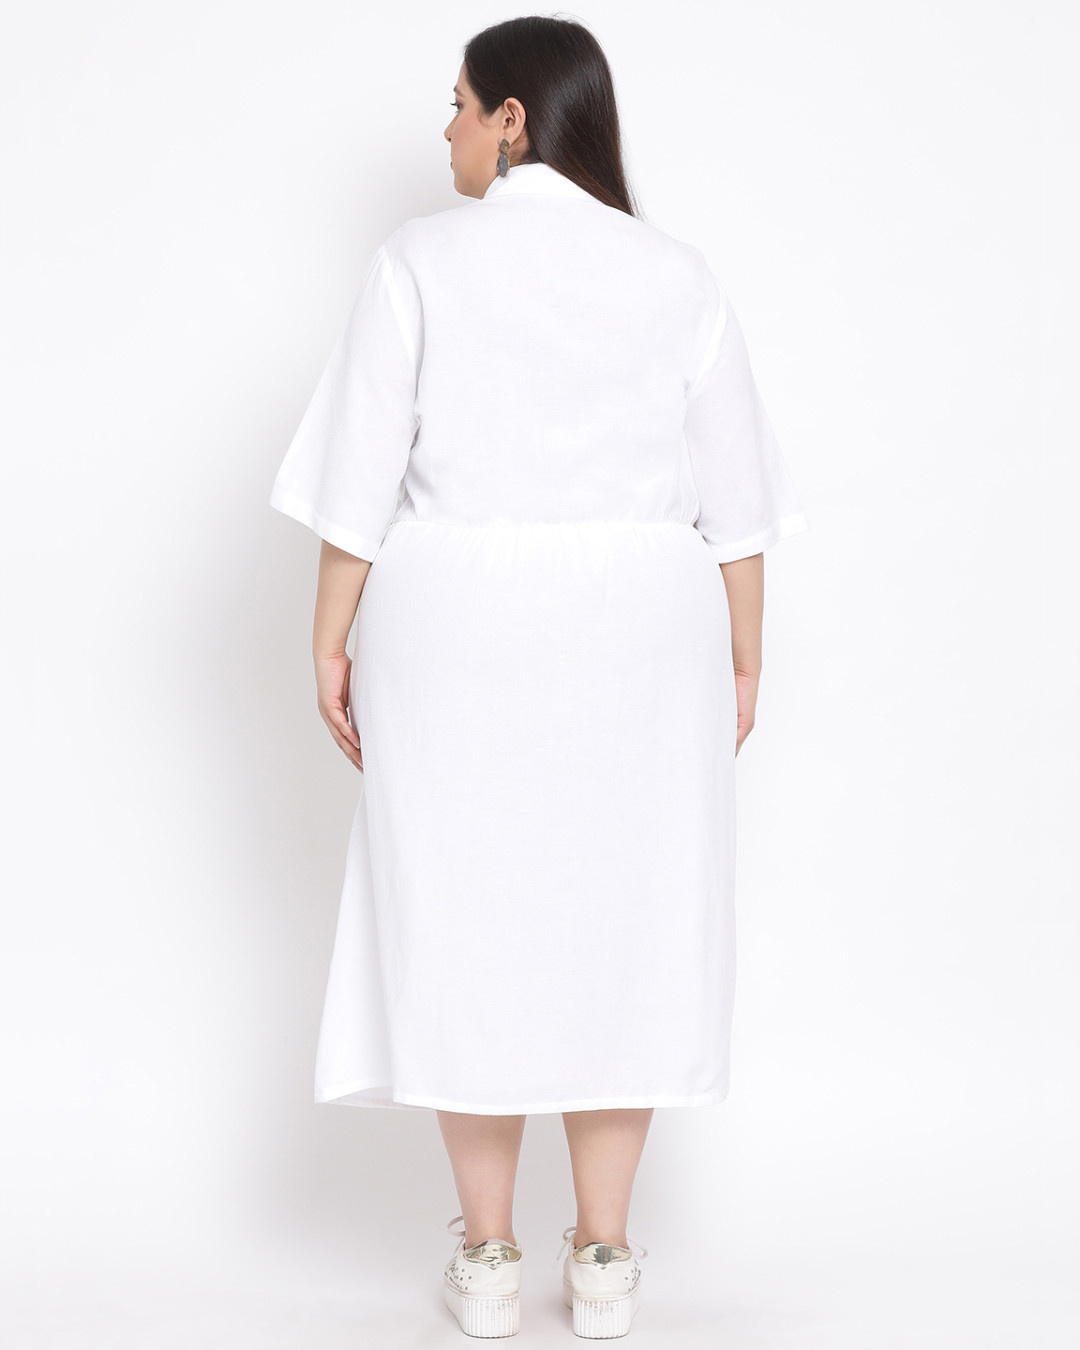 Shop Women's Plus Size White Solid Collared Dress-Back